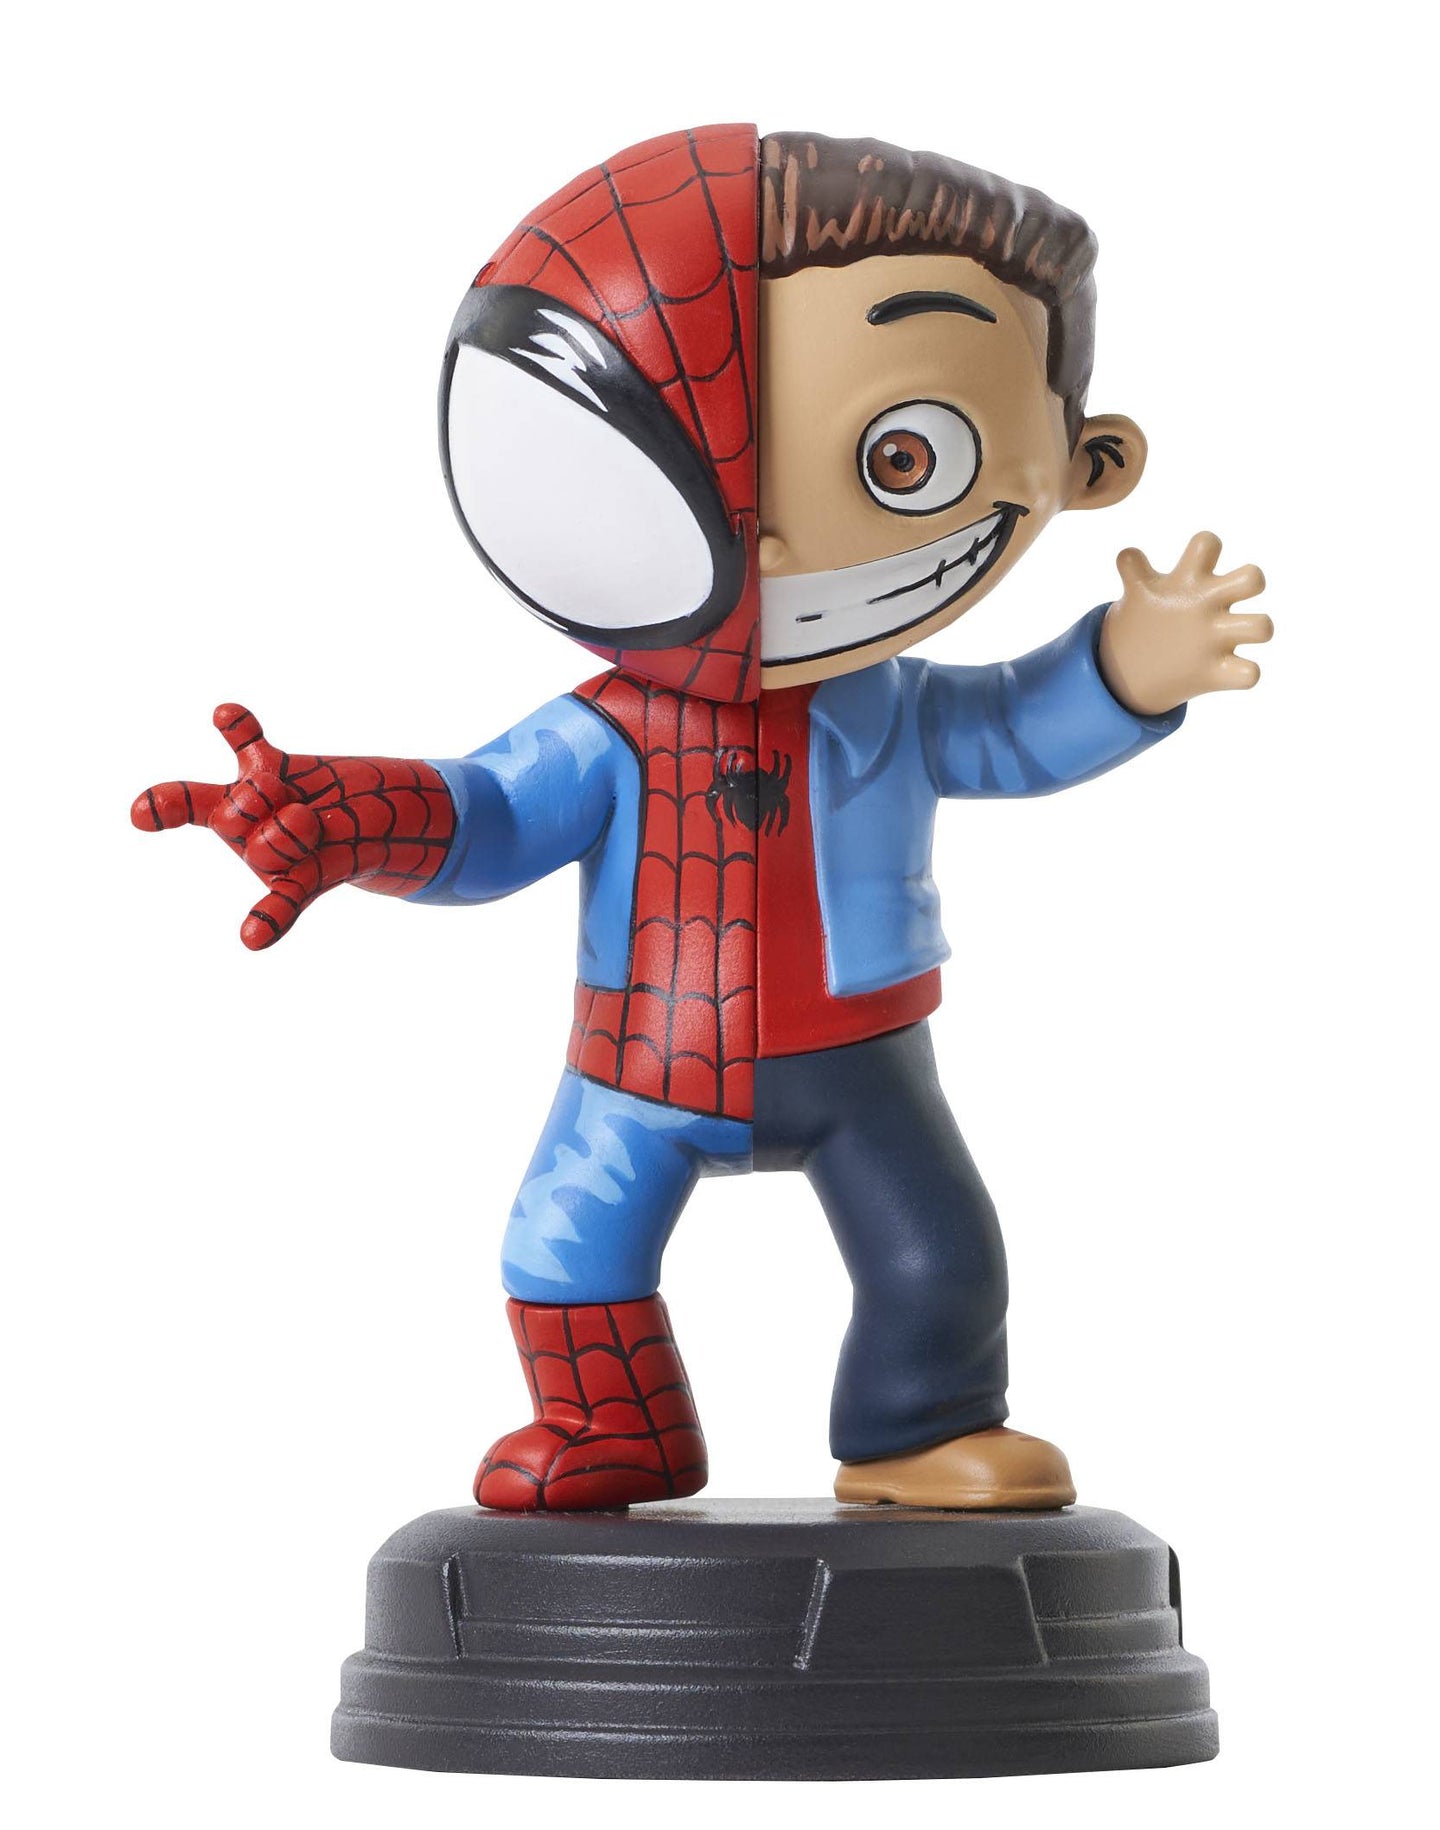 Peter Parker Spider-Man Animated 4 Inch Statue by Skottie Young